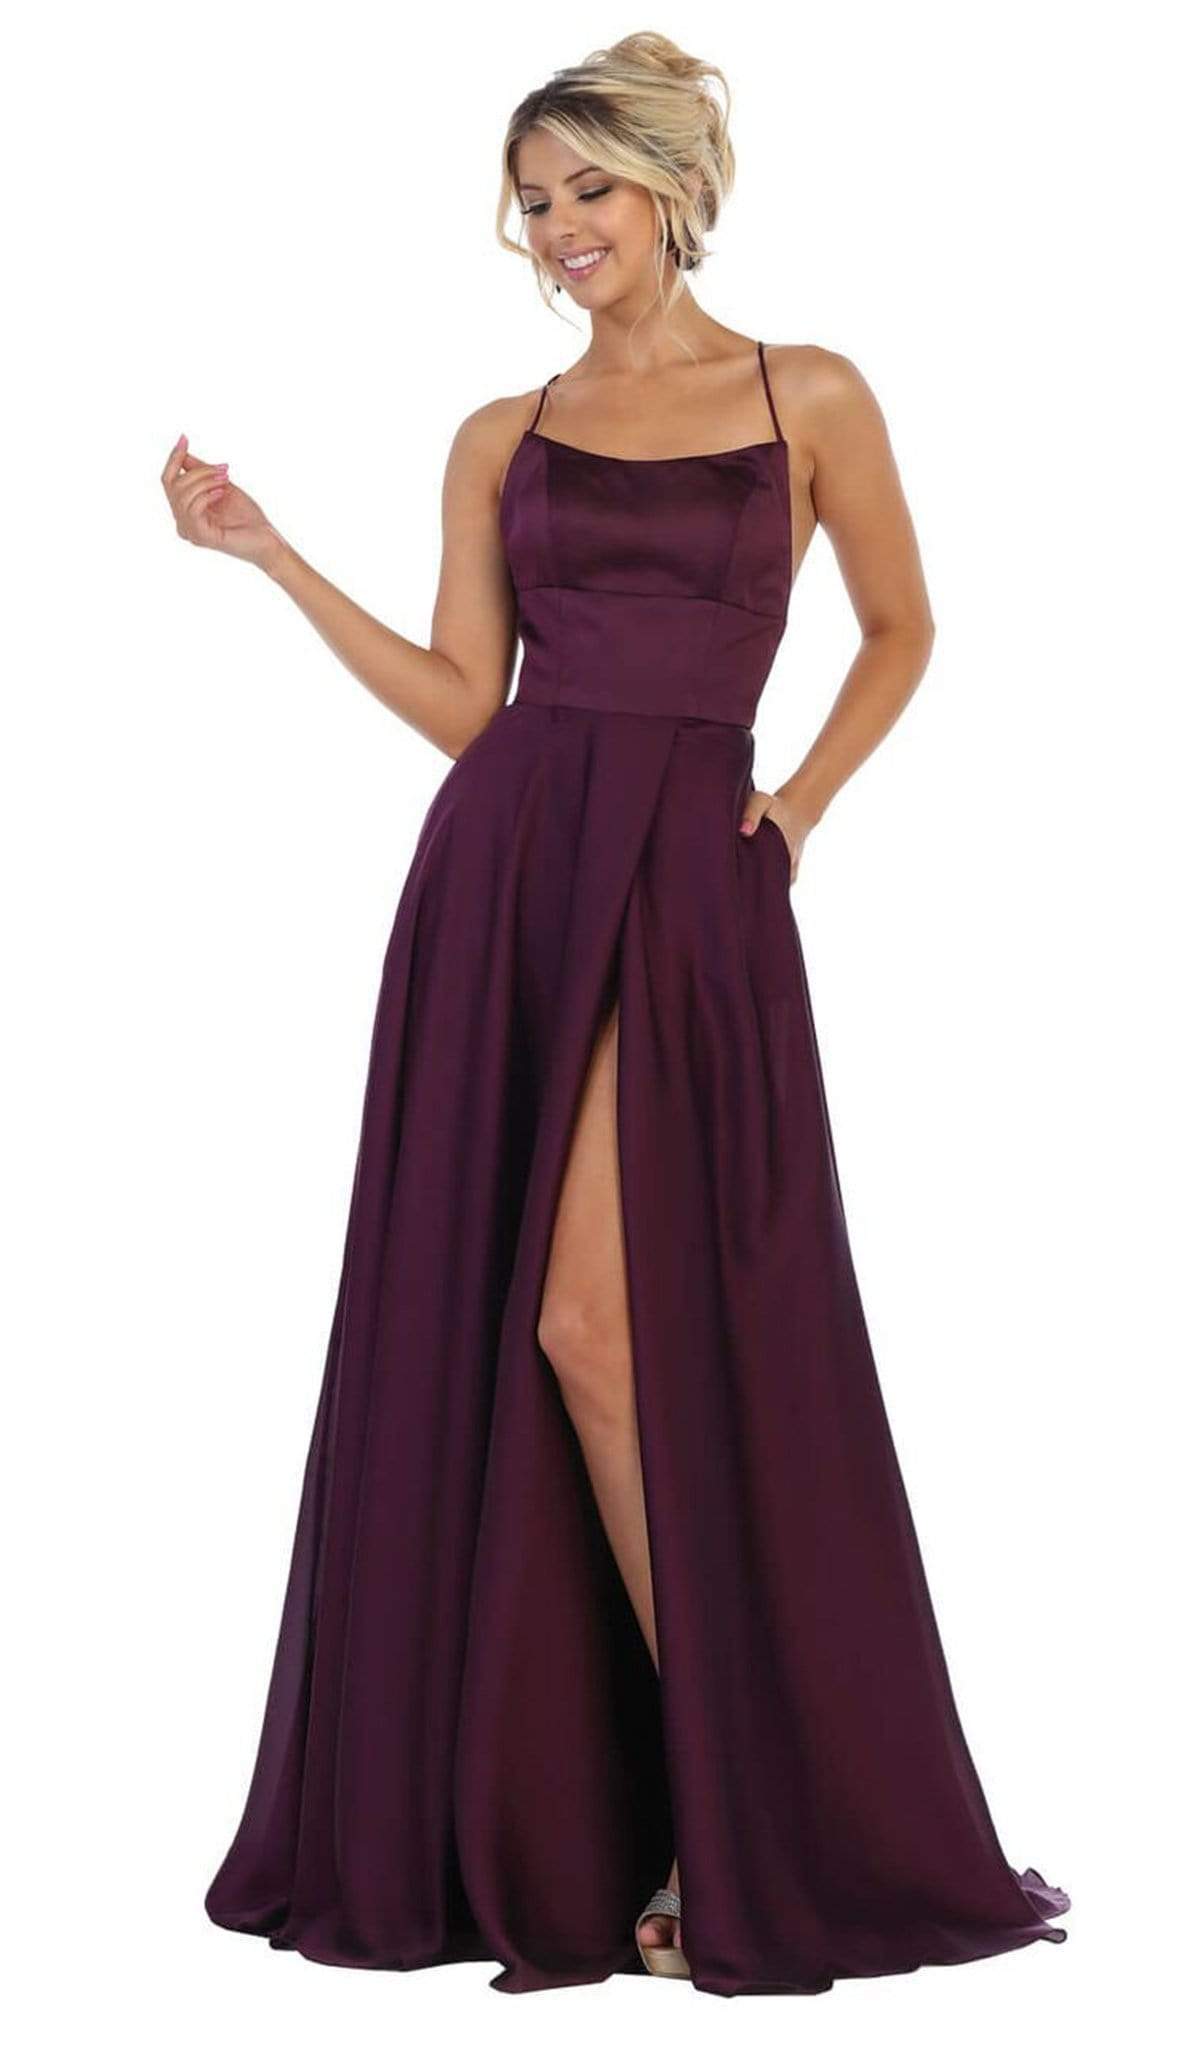 May Queen - MQ1642 Halter Neck Tie String Back A-Line Satin Gown Prom Dresses 2 / Eggplant